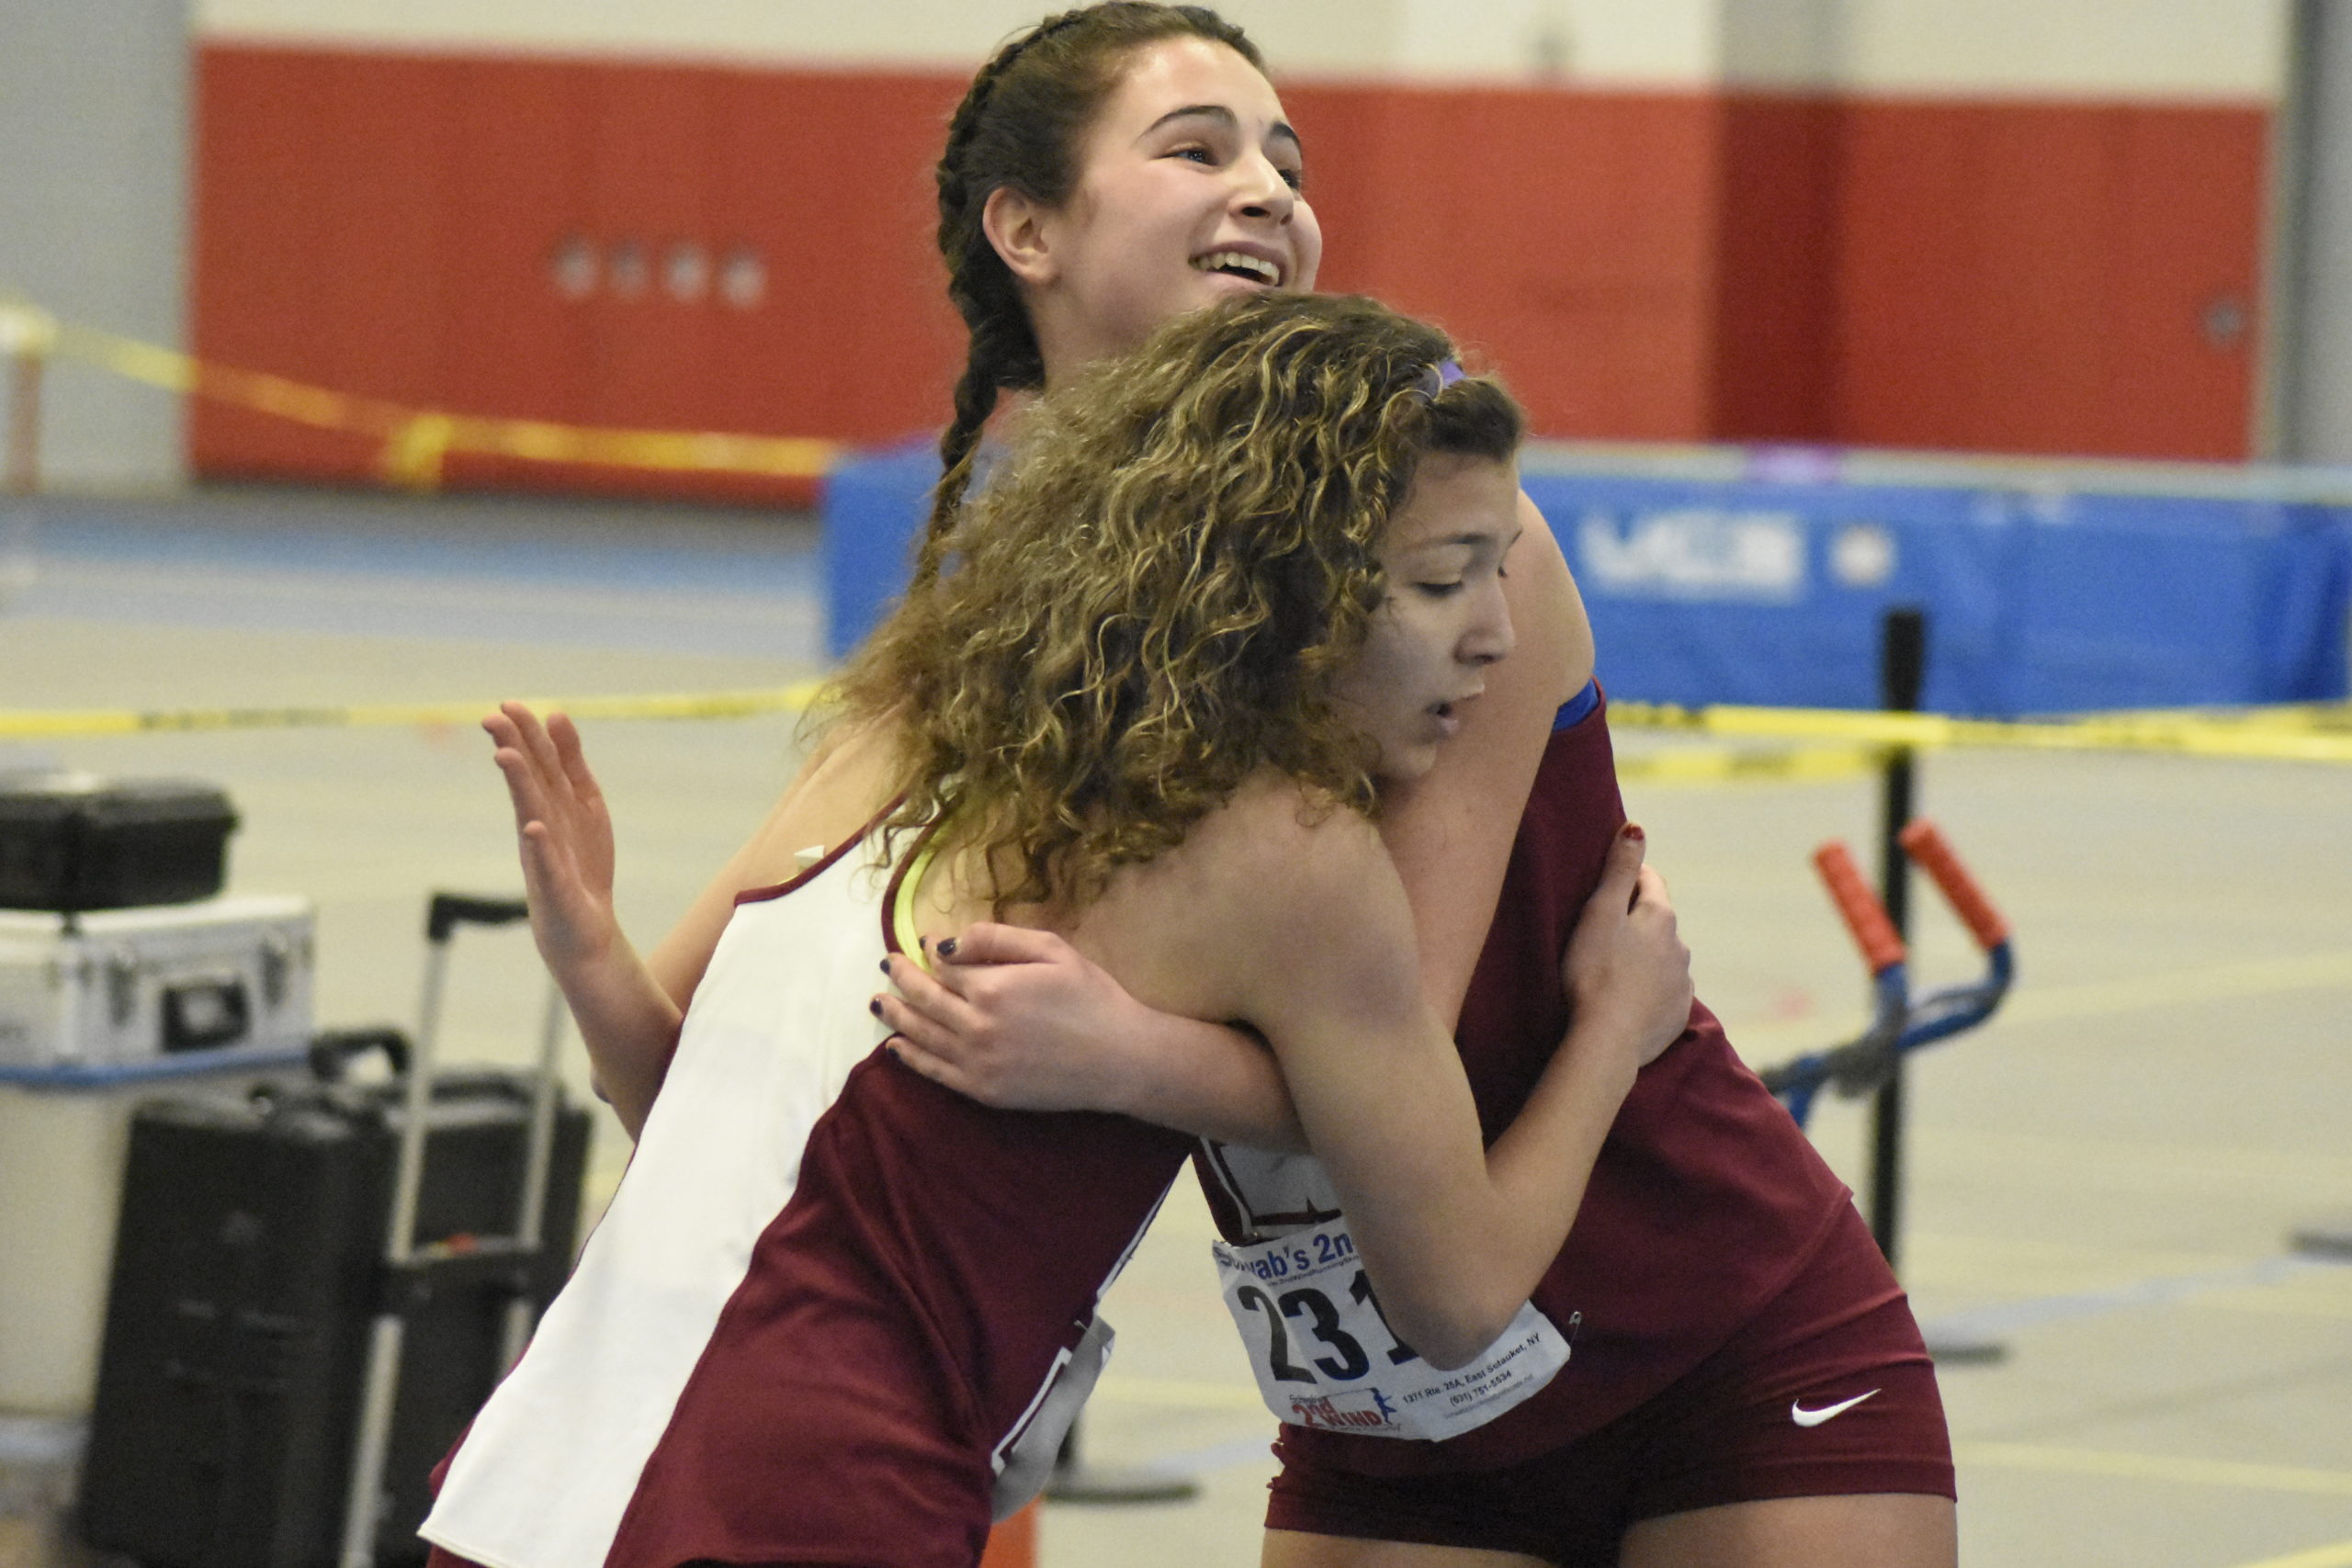 Amanda Mannino and Gabriela Arnold embrace each other after finishing a relay race in February 2020.